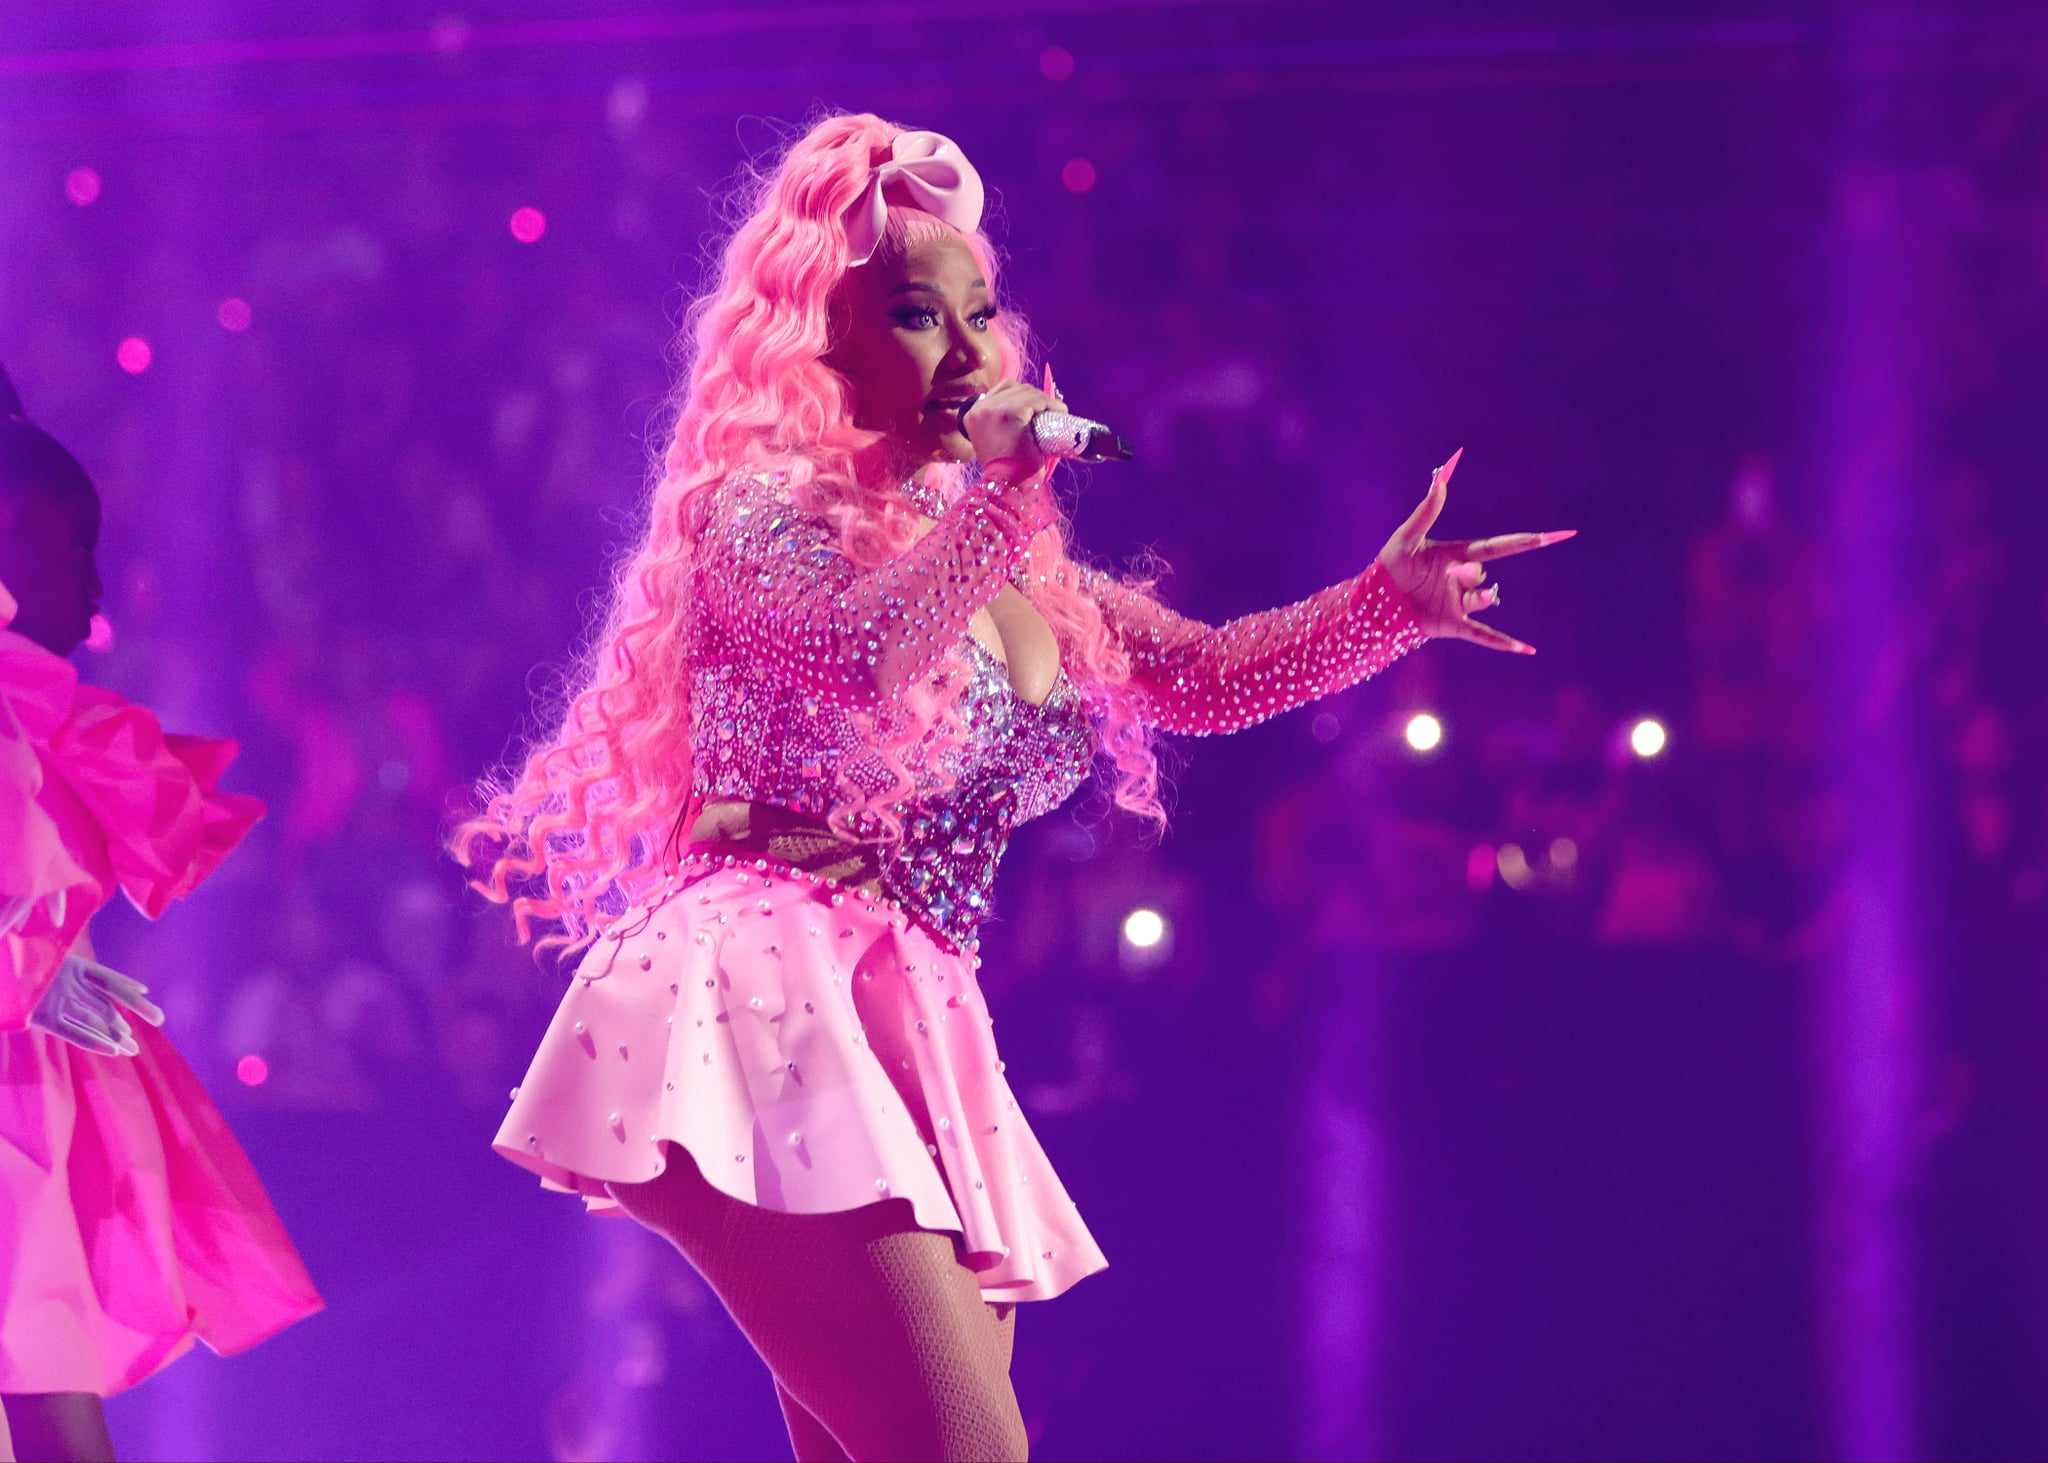 Nicki Minaj onstage during the 2022 MTV Video Music Awards at Prudential Centre in Newark, New Jersey. (Photo by Christopher Polk/Variety via Getty Images)